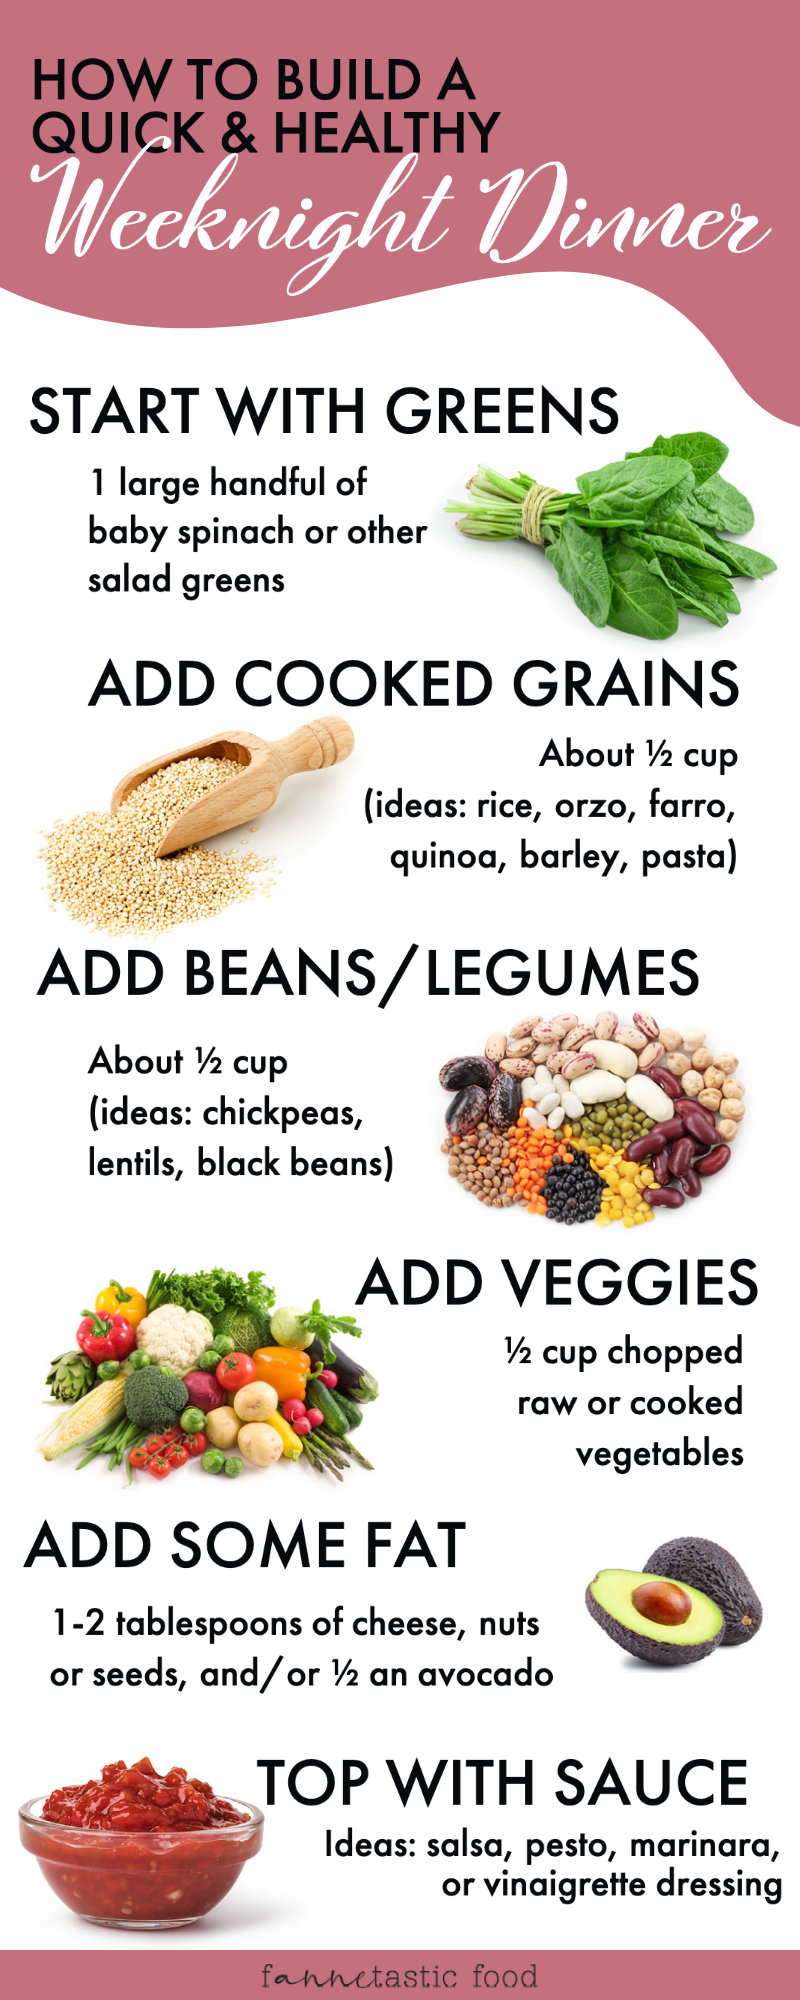 infographic with steps for how to build a quick healthy weeknight dinner